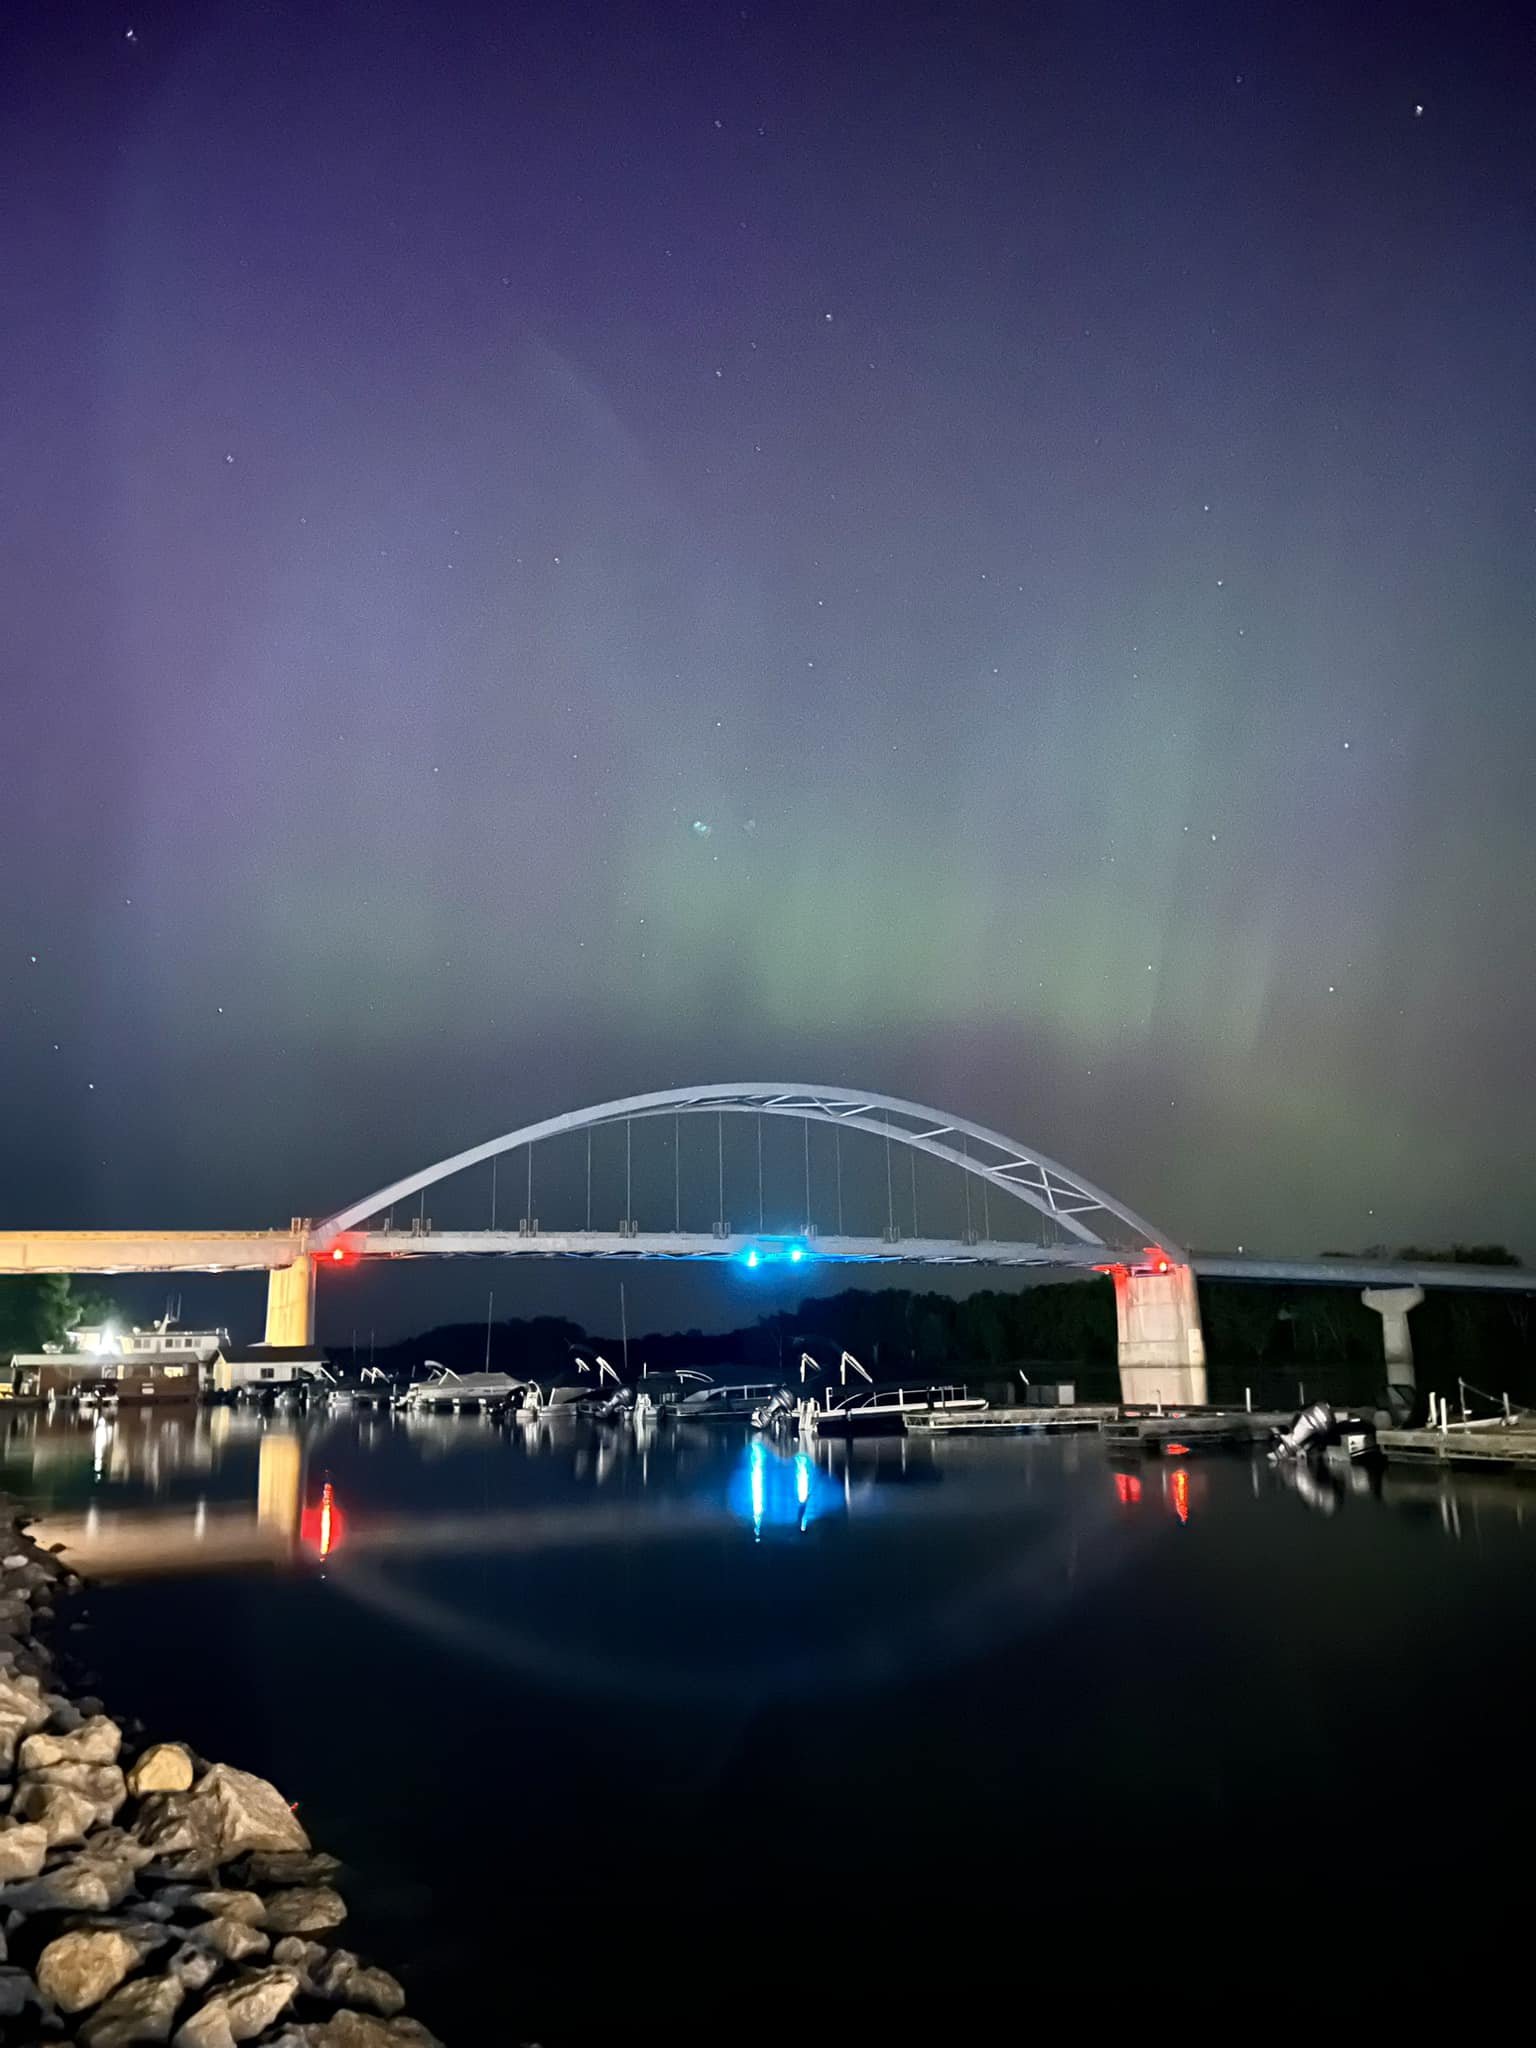 What a treat to view the Northern Lights in the Ports of Discovery! 💜

#portsofdiscovery #marquetteiowa #thisisiowa #mississippiriver #northernlights #aurora